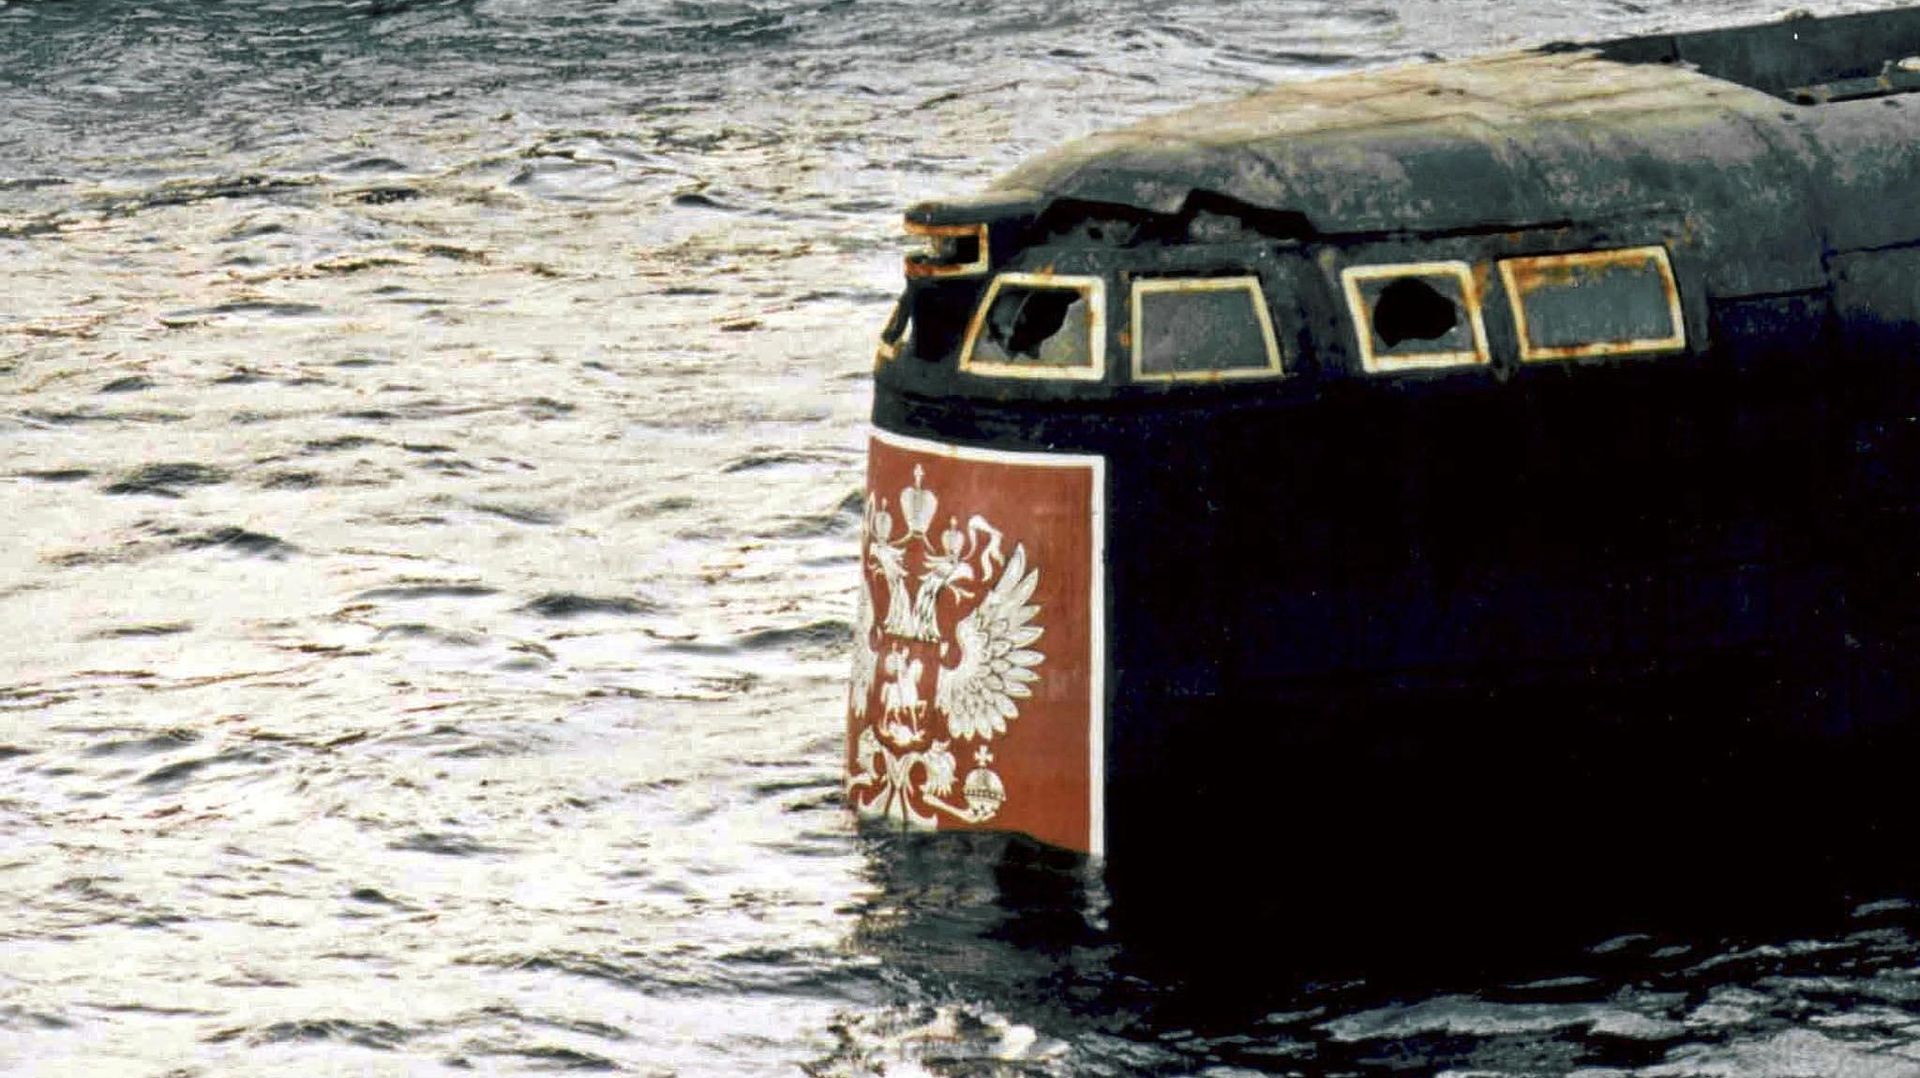 The conning tower of the Kursk nuclear submarine appears at the surface in the port of Roslyakovo, near Murmansk, 23 October 2001